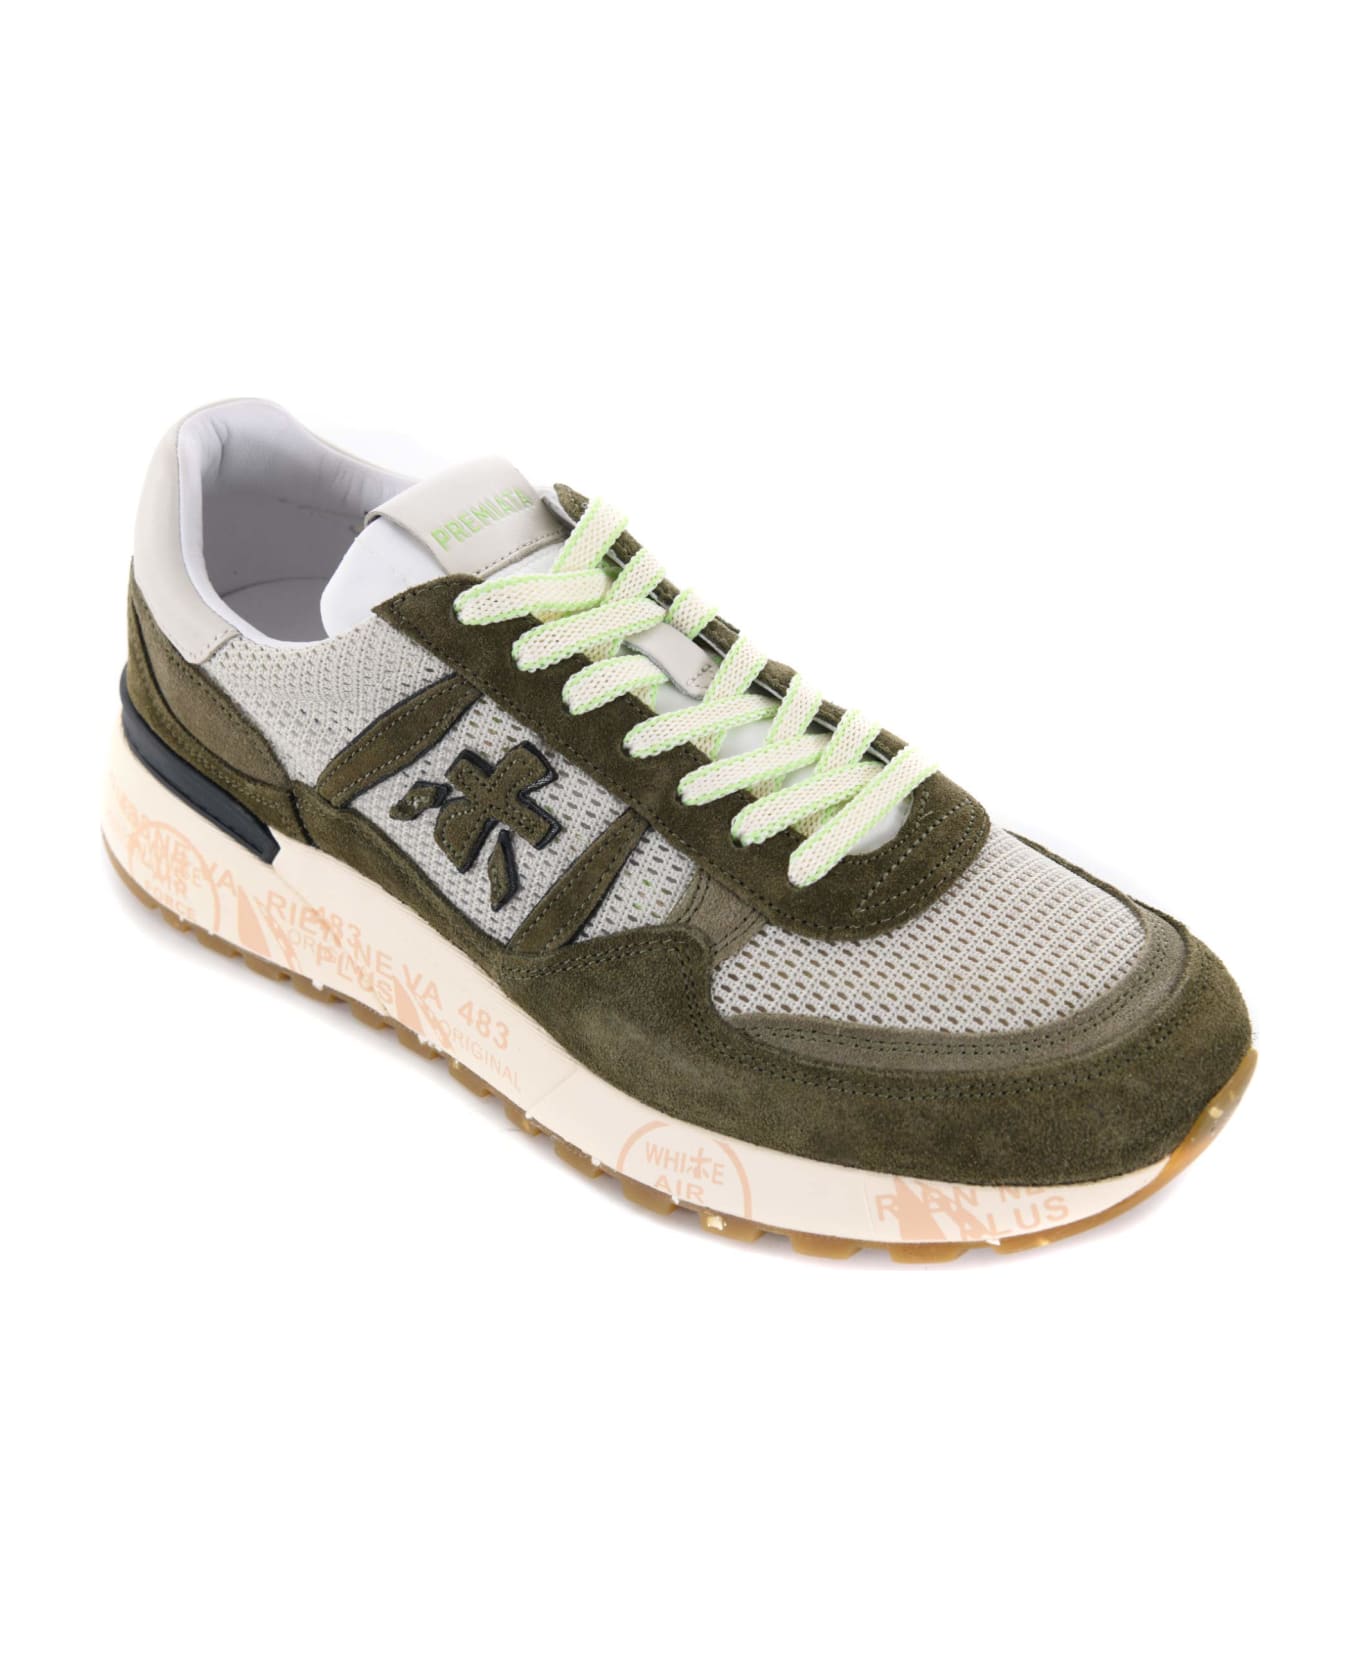 Premiata Sneakers In Suede And Perforated Mesh - Verde militare